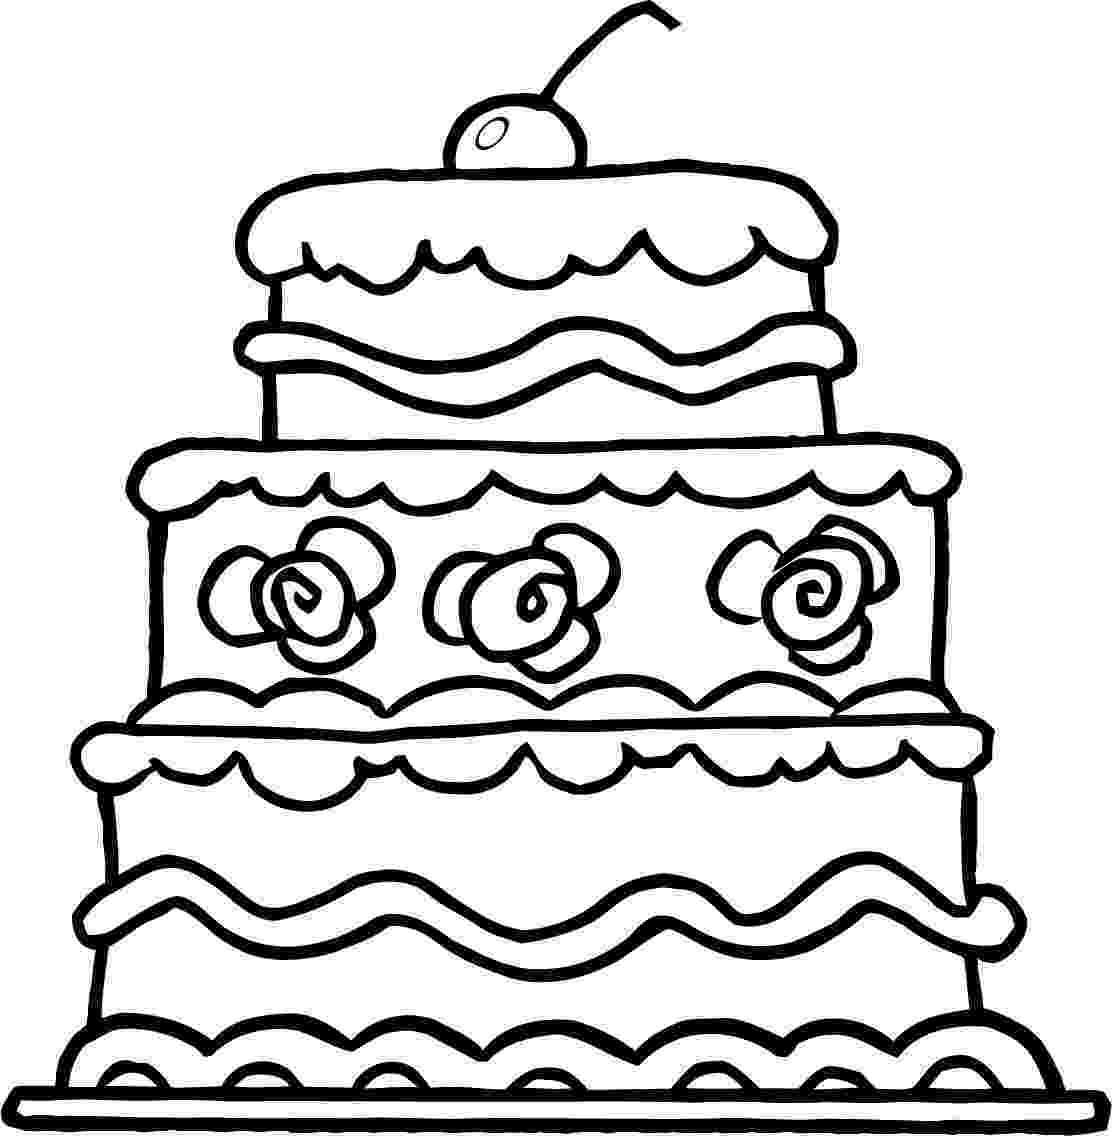 cake coloring page cake coloring pages to download and print for free coloring page cake 